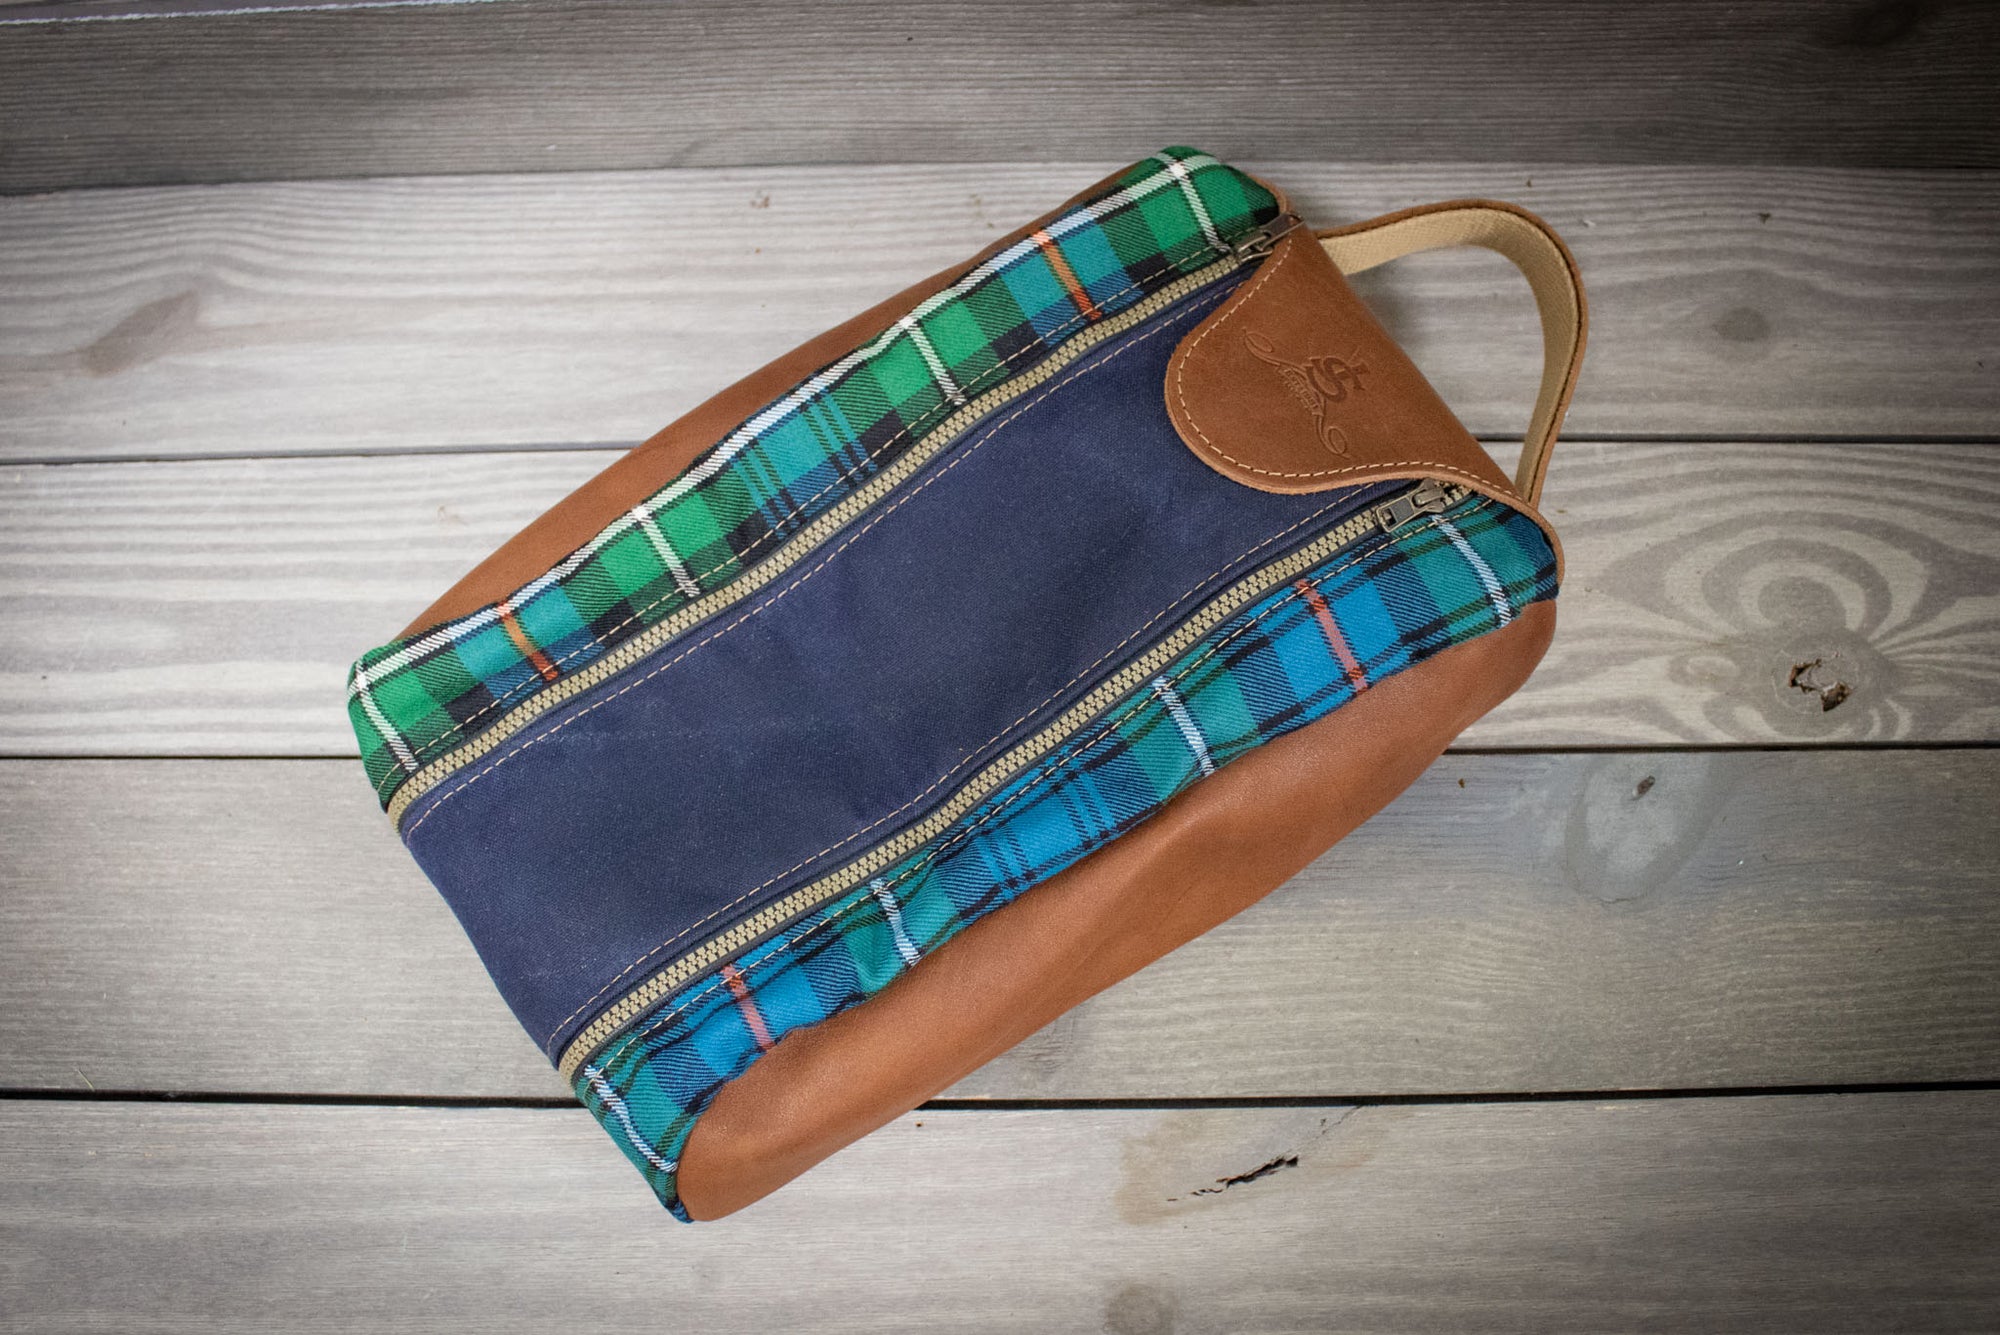 Mackenzie OC Tartan and Navy with Natural Leather Shoe Bag